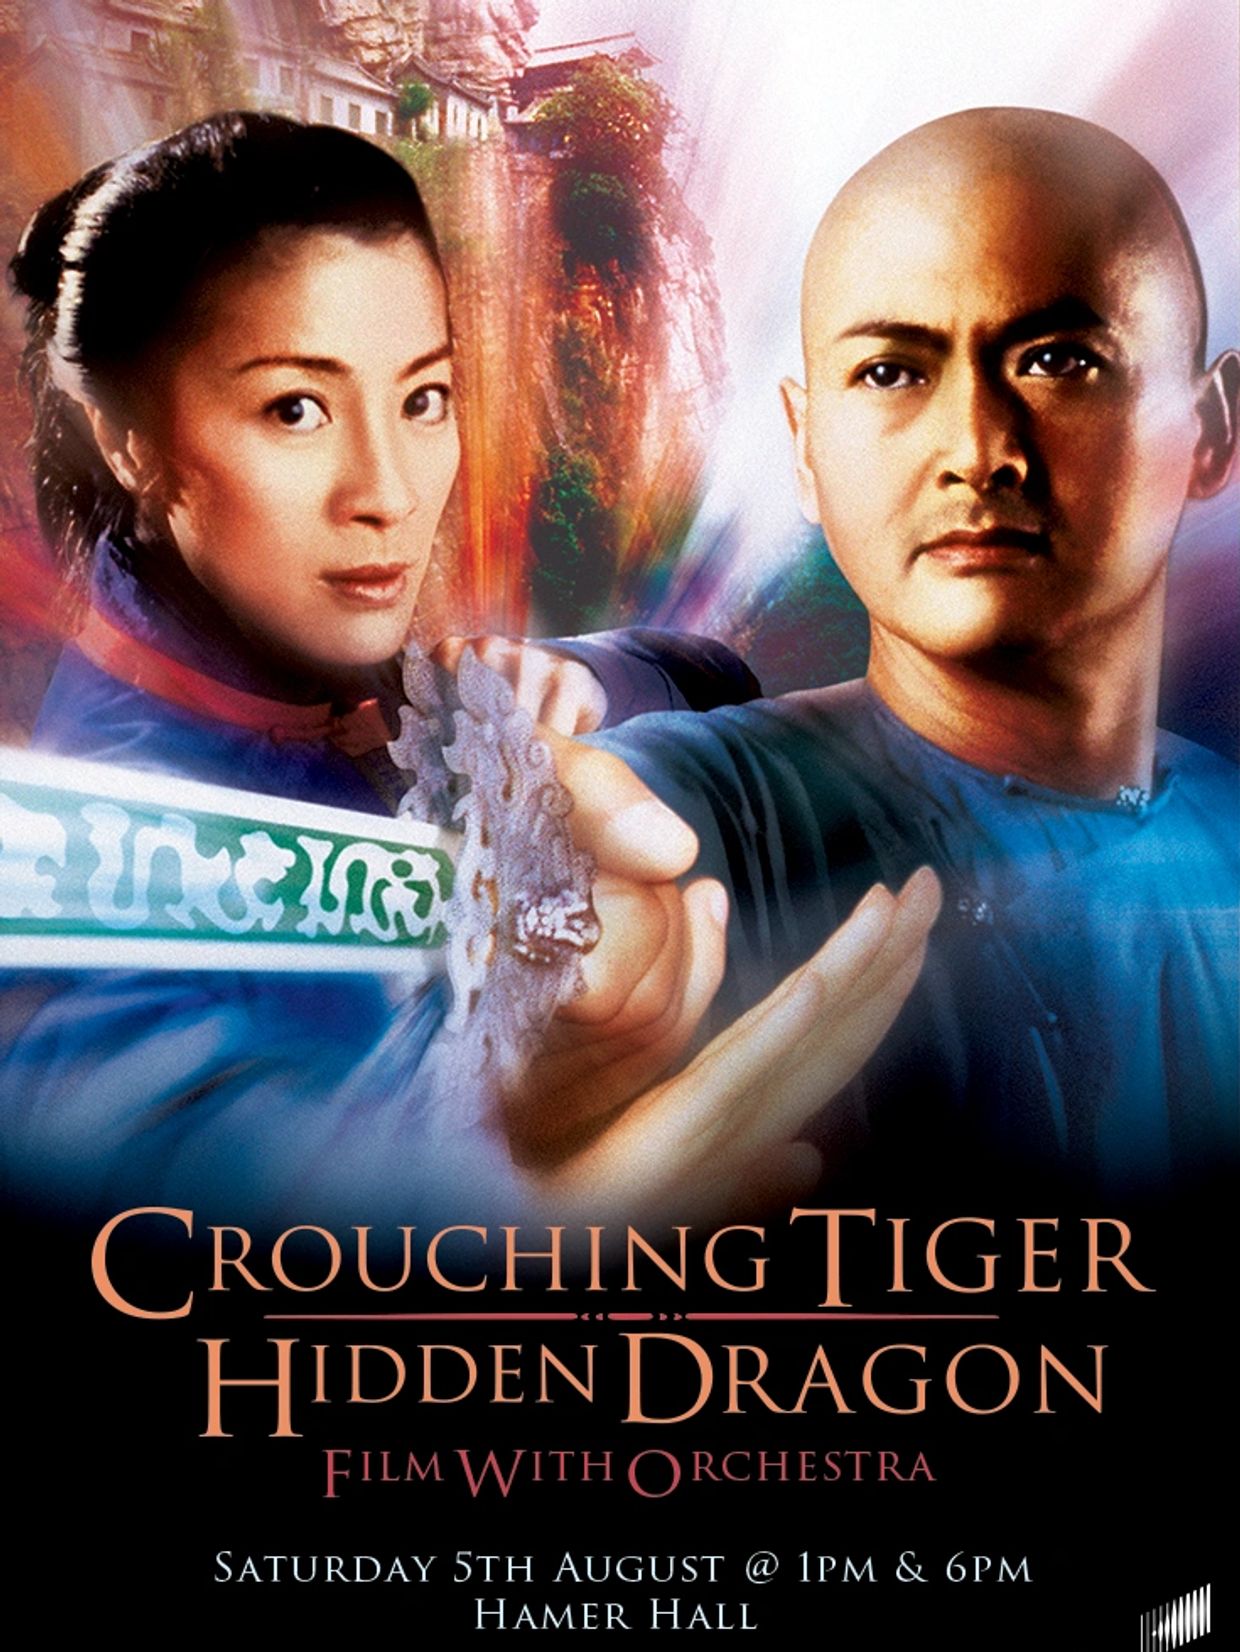 Crouching Tiger Hidden Dragon: Film with Orchestra. 